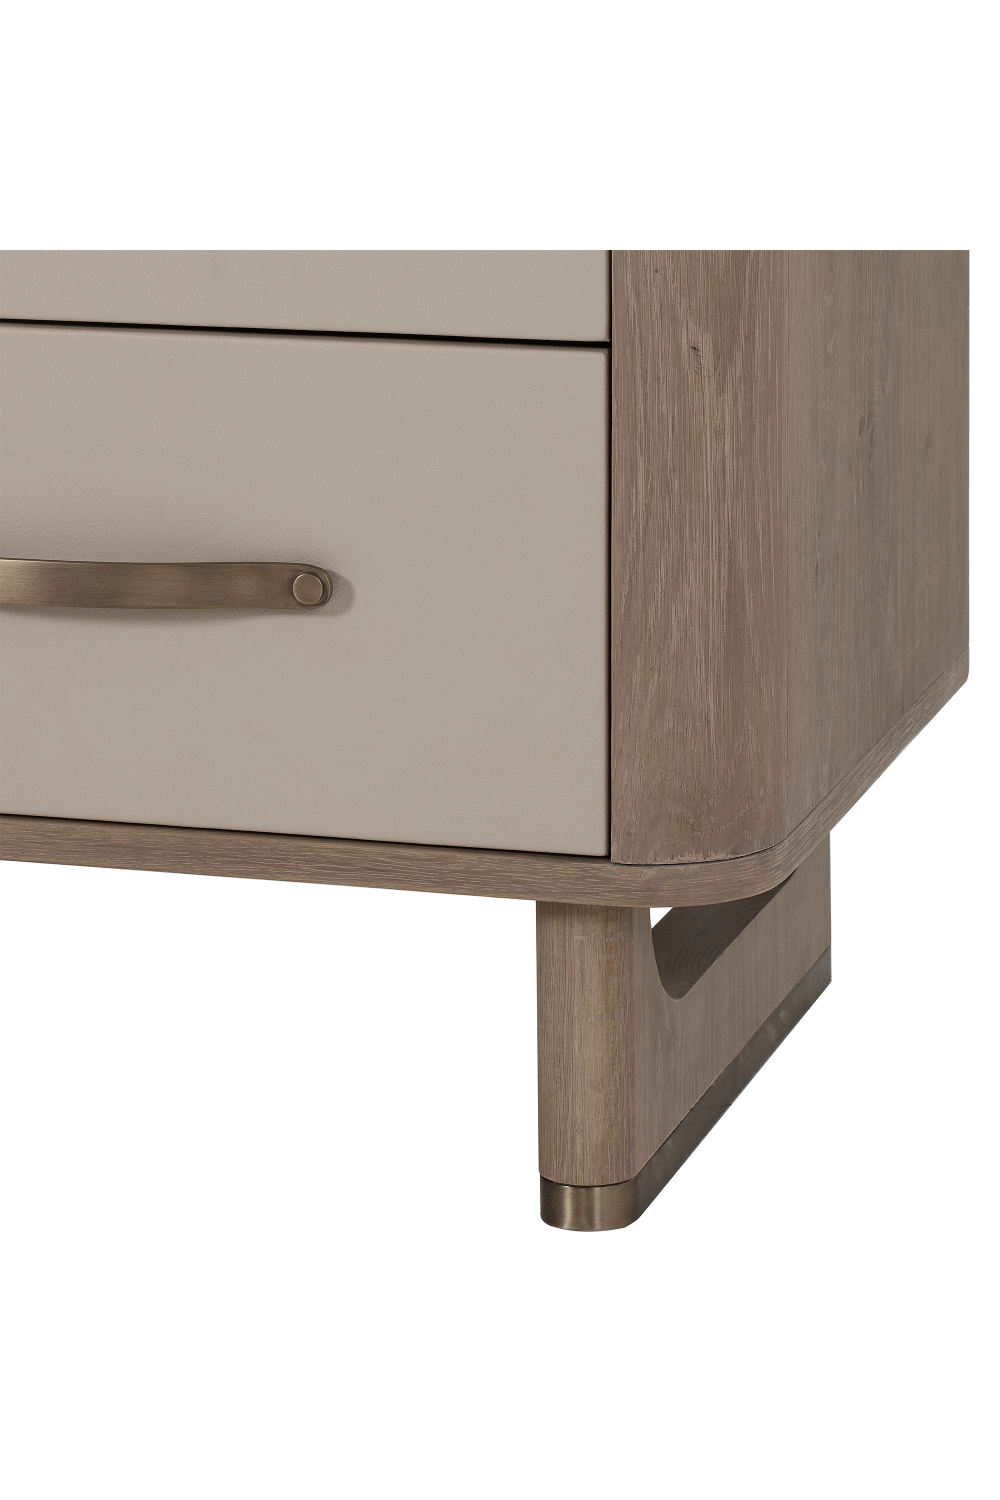 Light Oak Sideboard with Three Drawers S | Andrew Martin Charlie